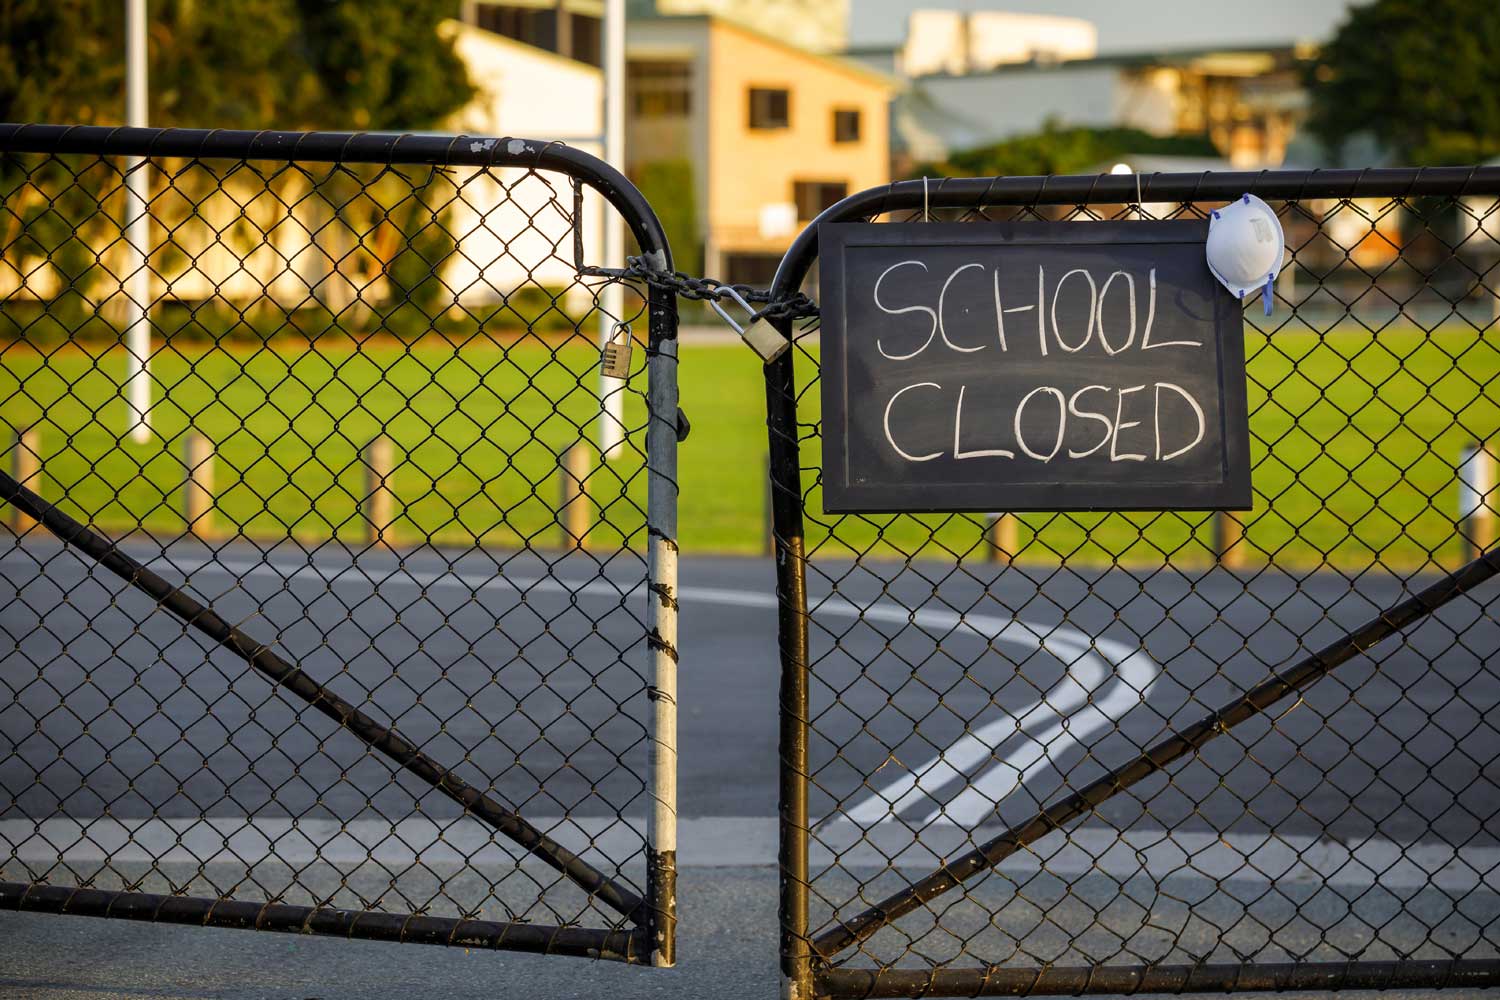 driveway with chain link fence and "school closed" sign